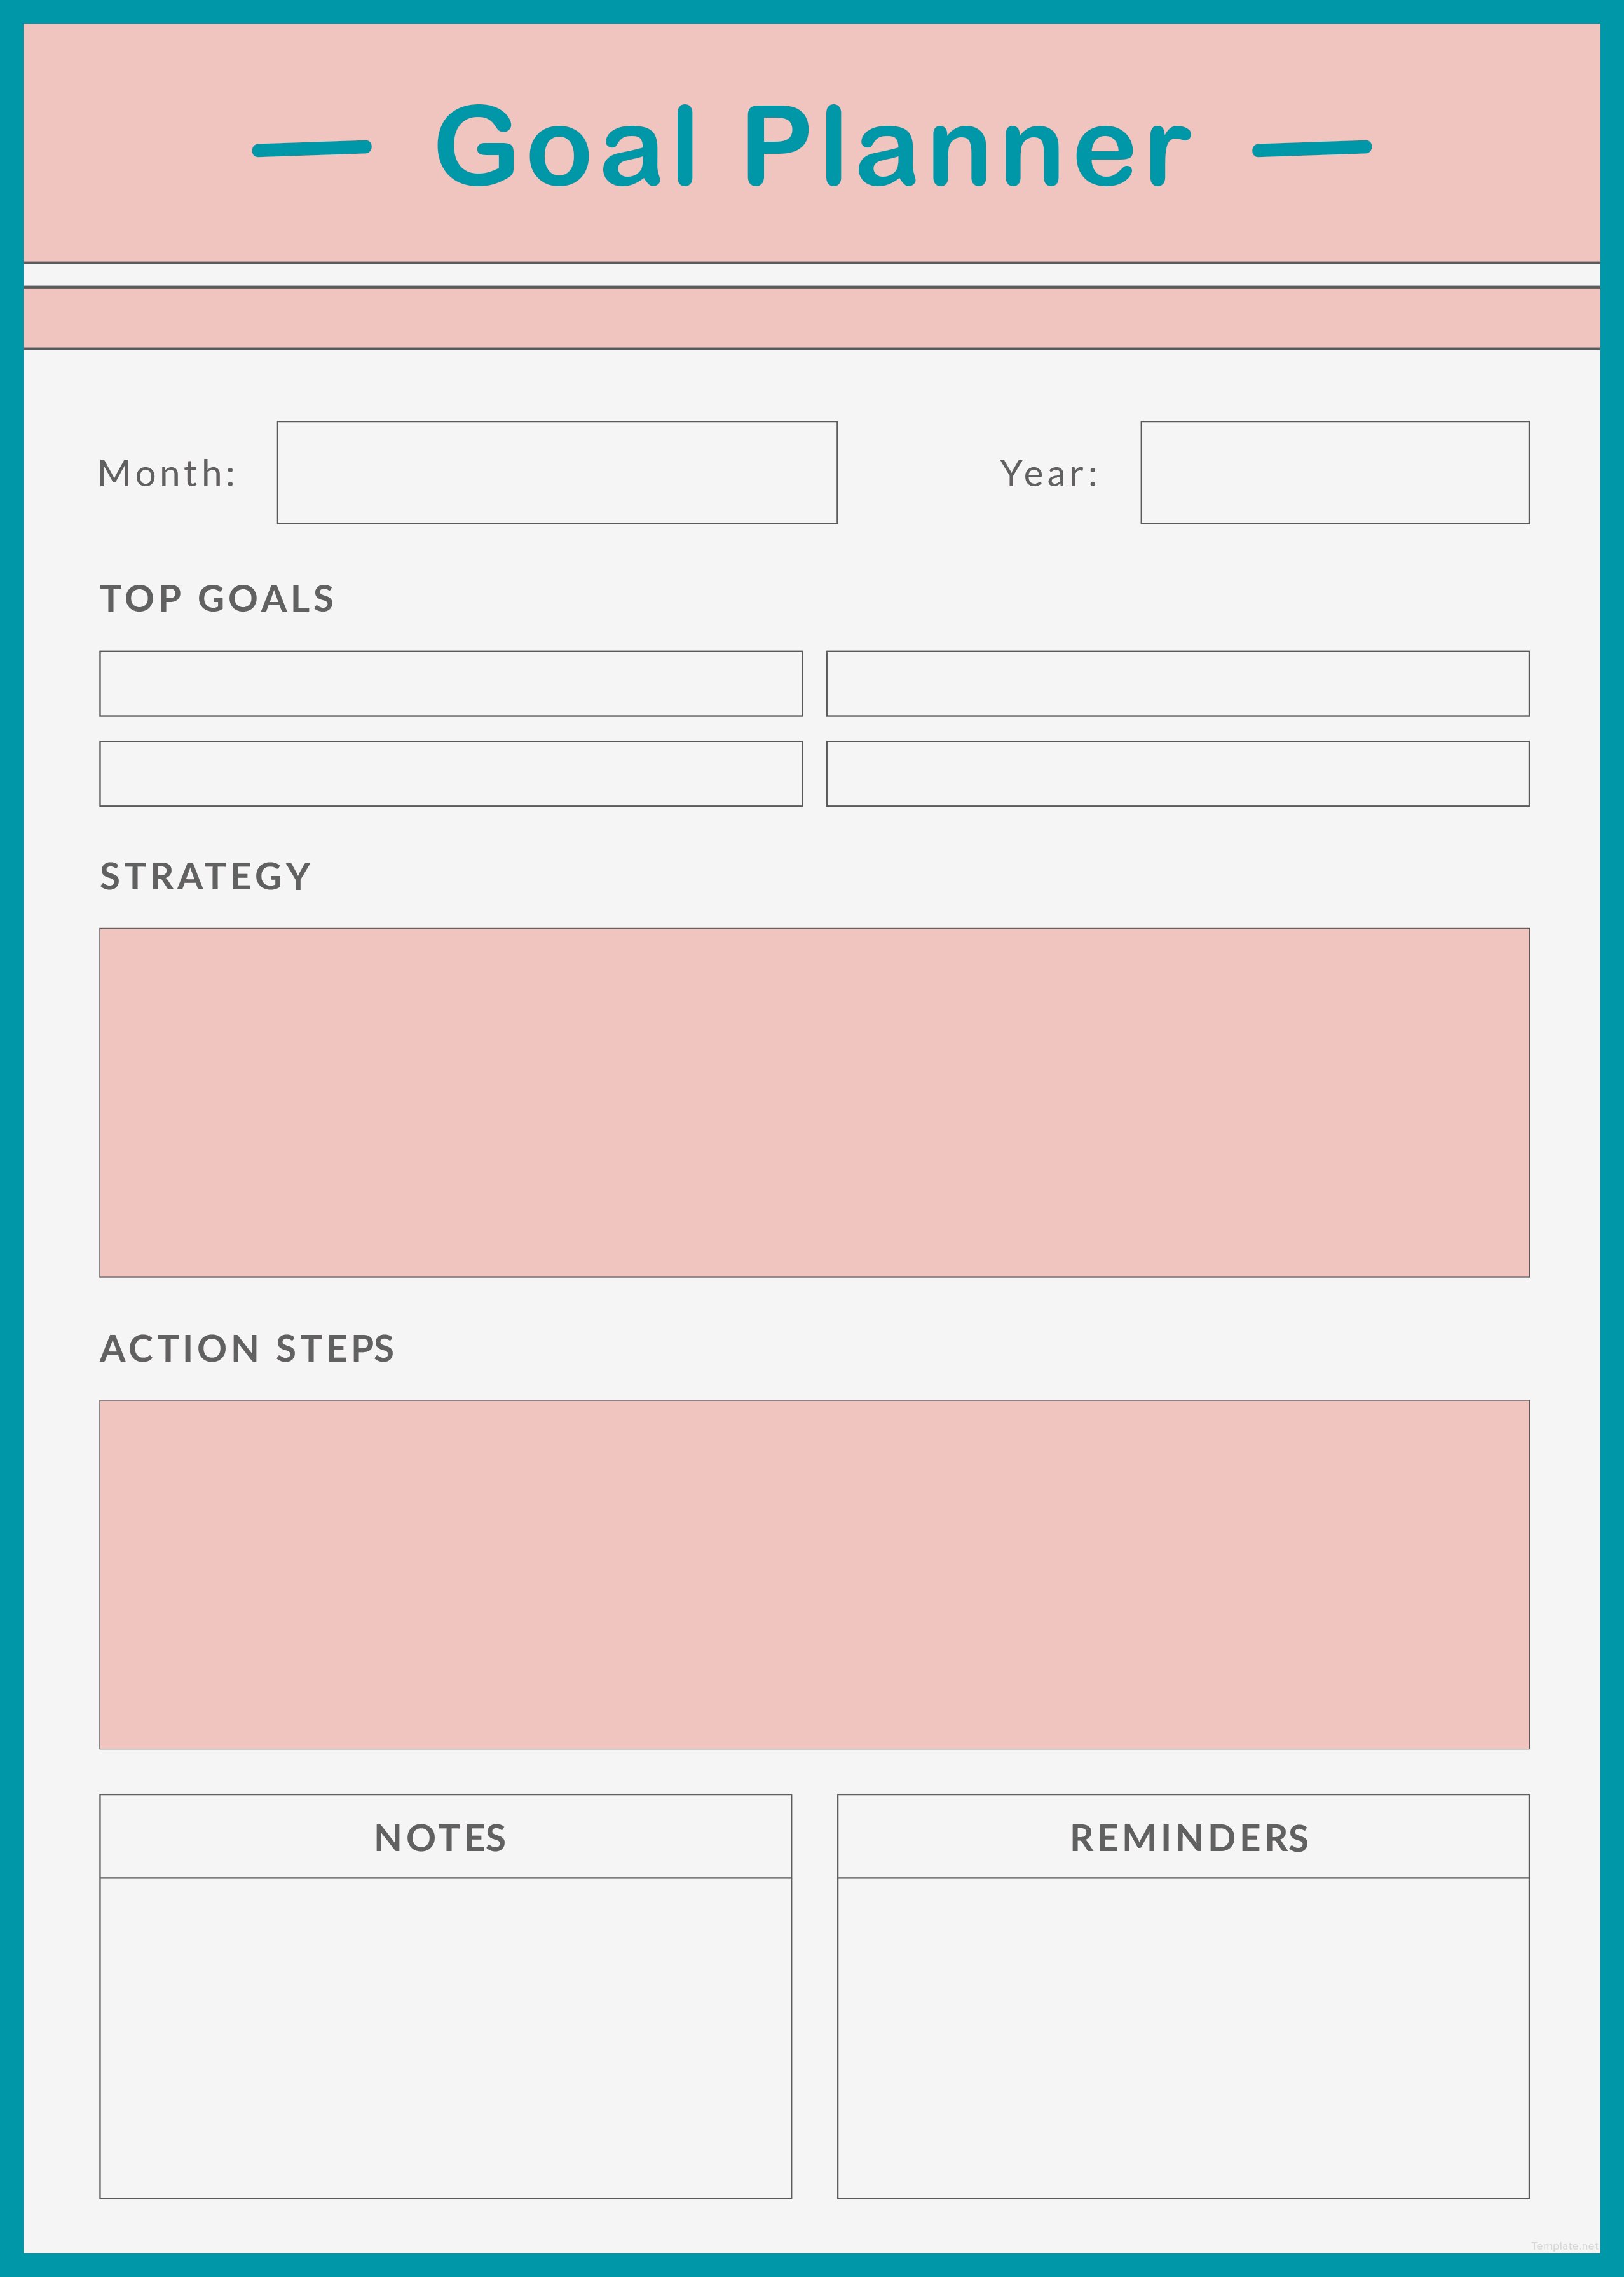 Goal Planner Template HotPicture